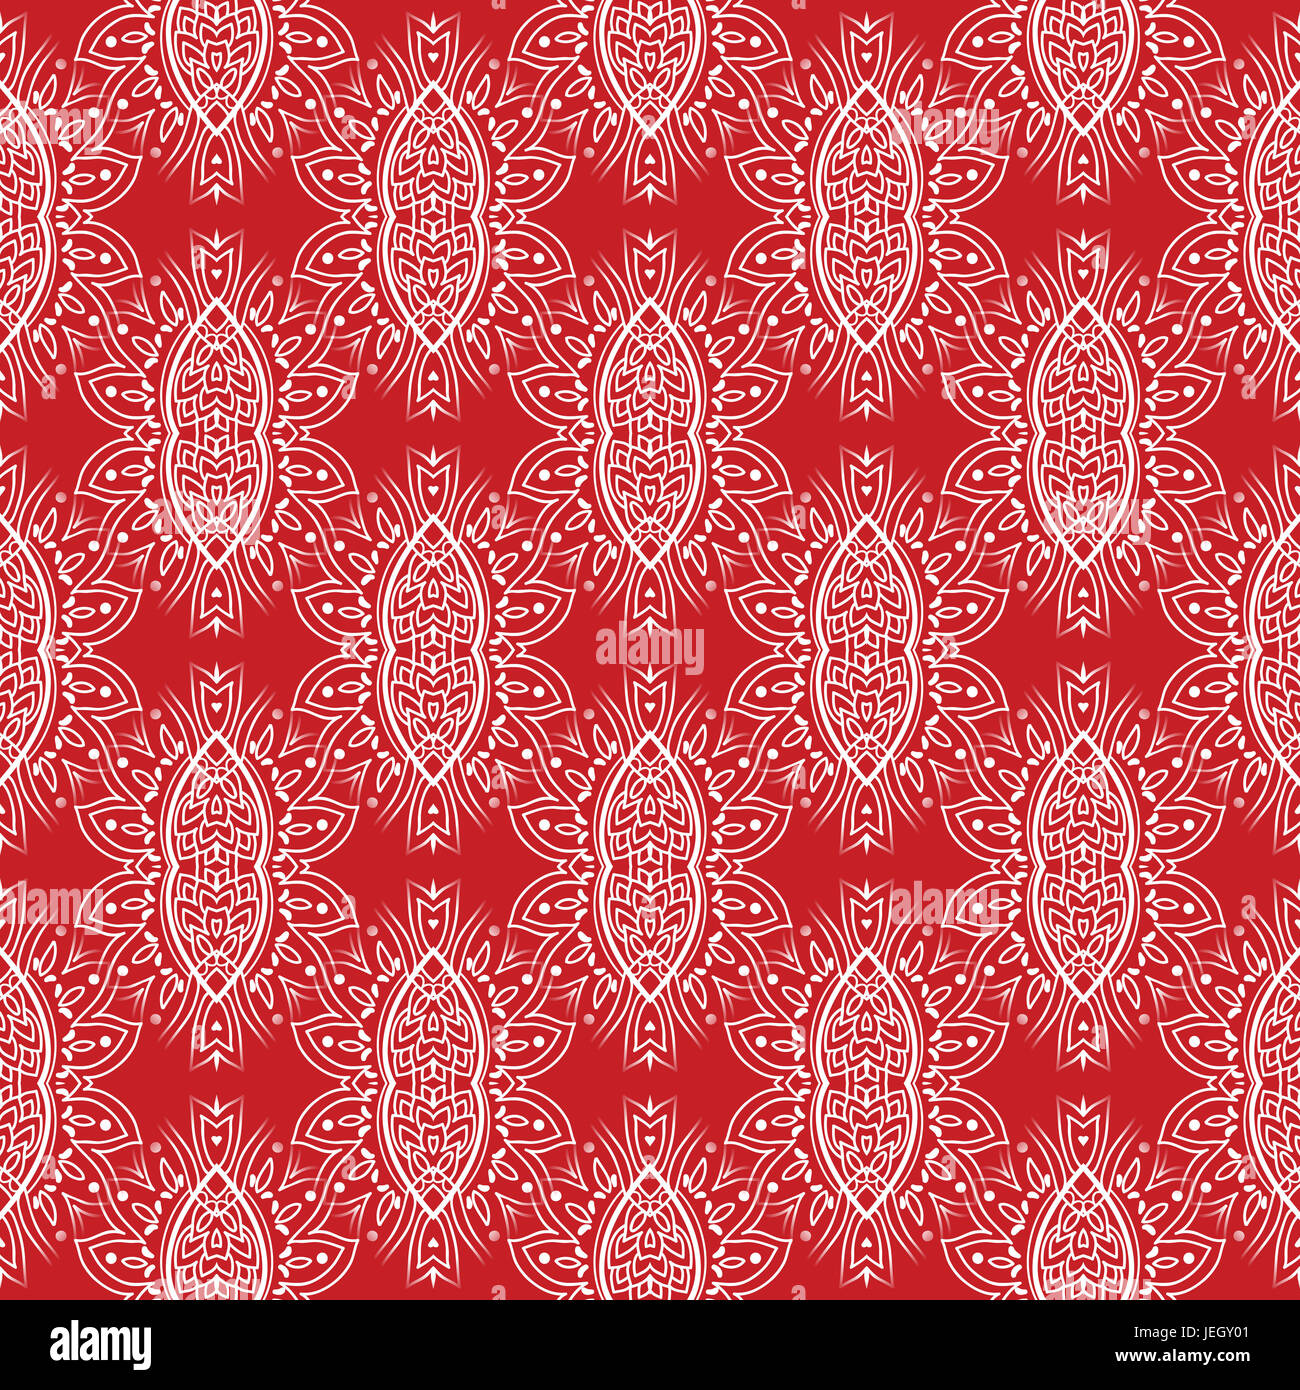 Hand drawn red and white bandana pattern. Seamlessly repeating wallpaper  pattern Stock Photo - Alamy